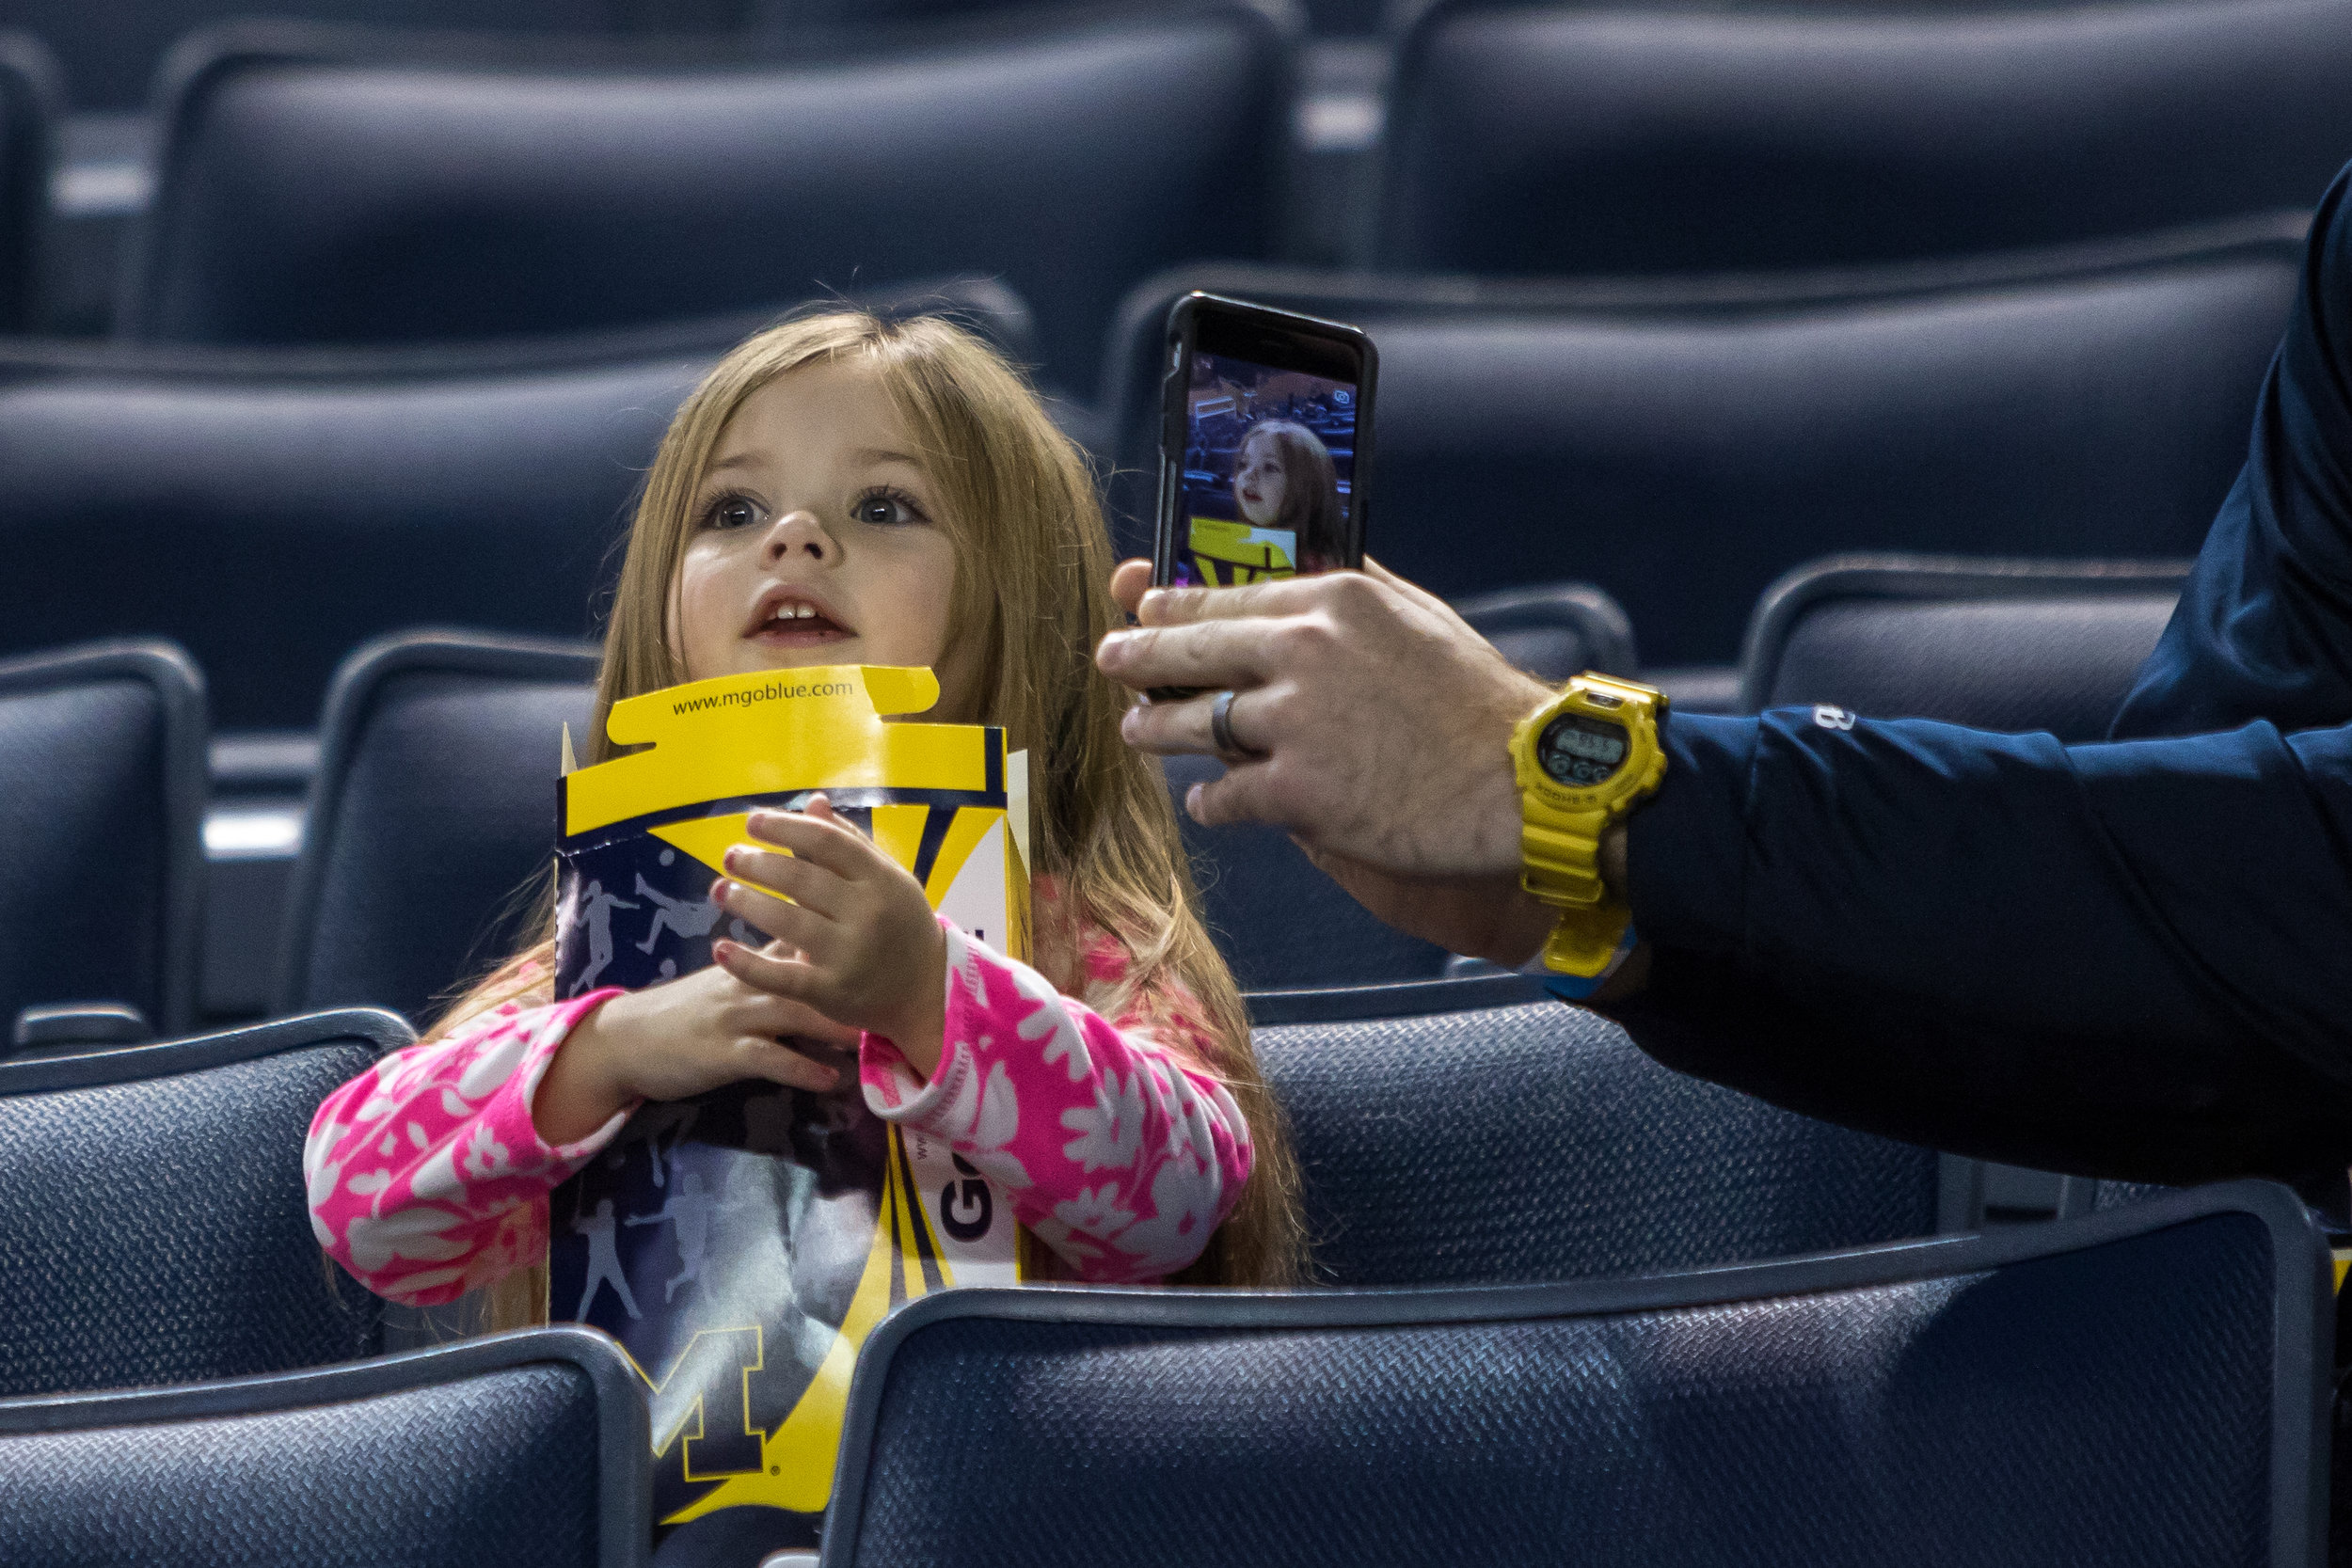  Dirk Roberts takes a photograph of his daughter Ava, 3, before tipoff between Michigan and Mount St. Mary's at the Crisler Center on Saturday, November 26, 2016. Matt Weigand | The Ann Arbor News 